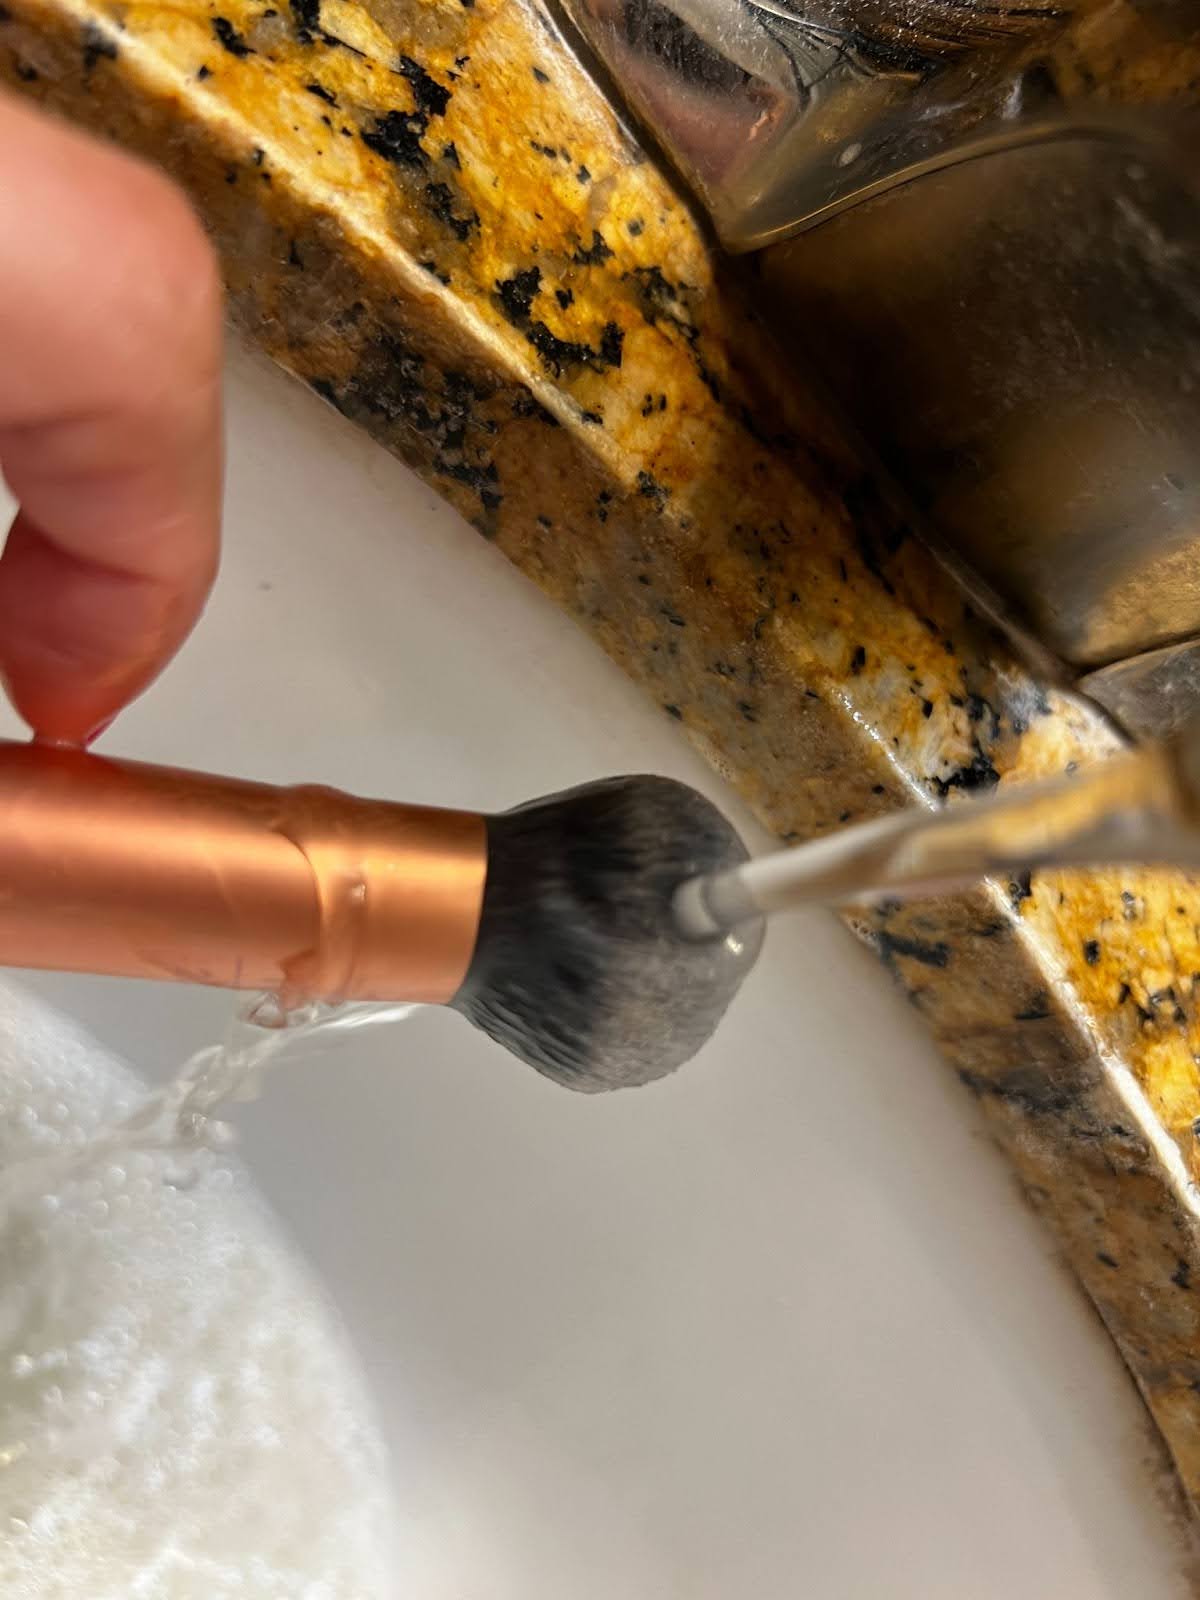 Rinse the makeup brush under running water to clean away soap and makeup, and repeat step 2 until the water runs clear.